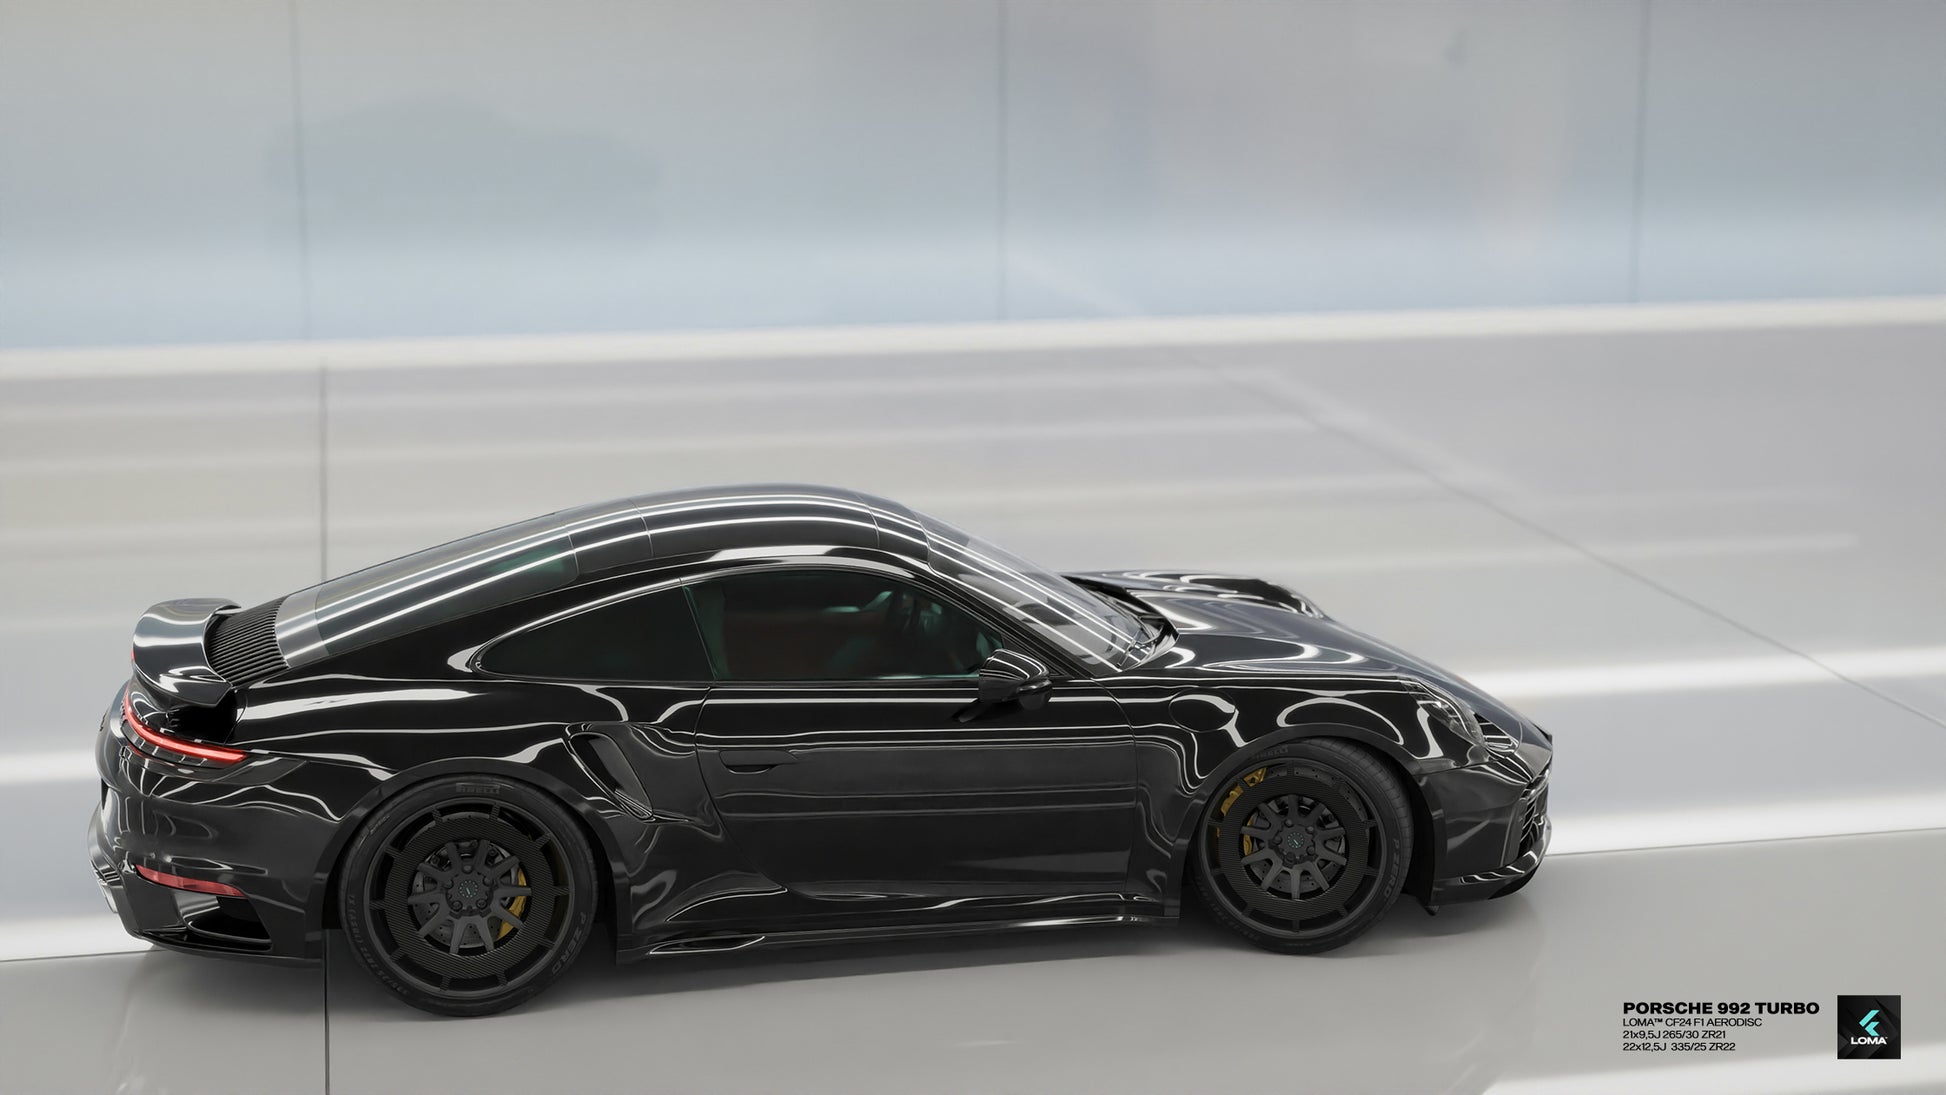 Side view of black Porsche 992 Turbo S with custom LOMA Forged CF24 F1 AERODISC wheels